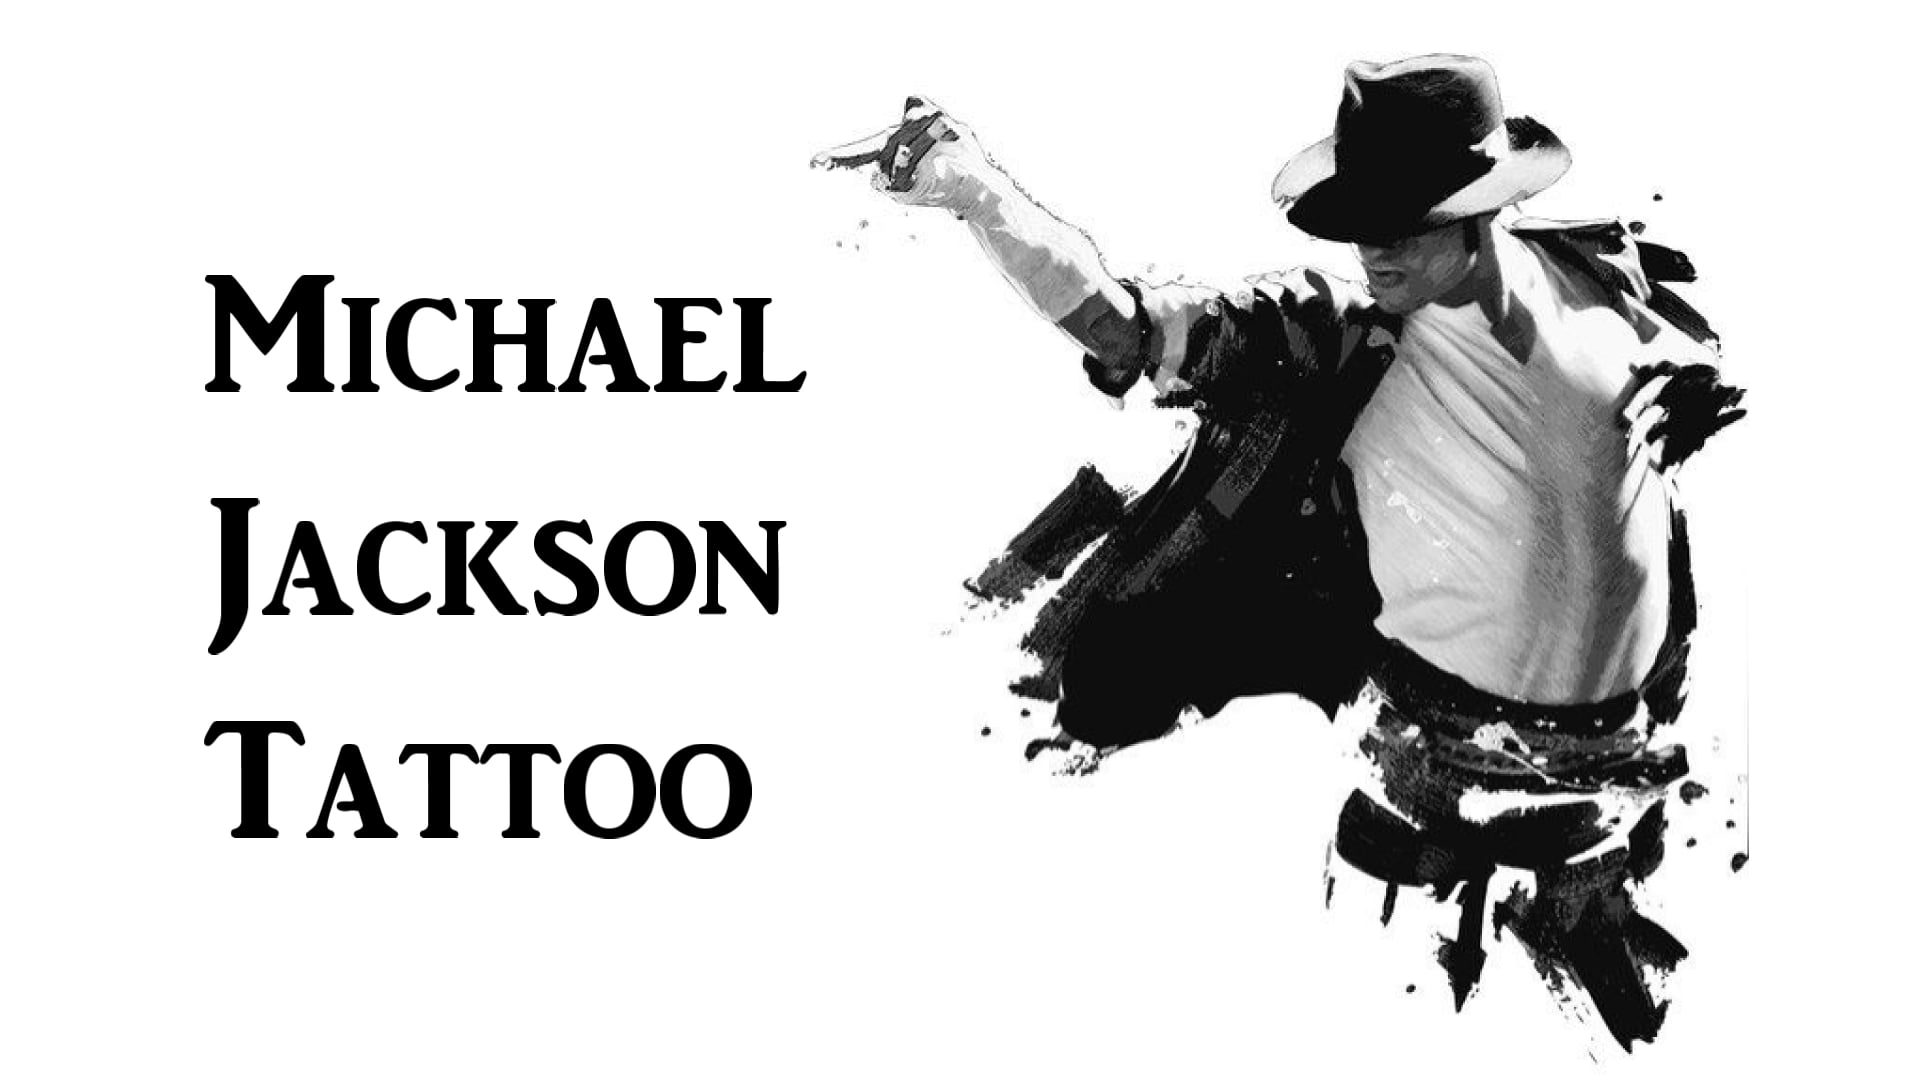 My 1st Michael Jackson tattoo in the making (2020)